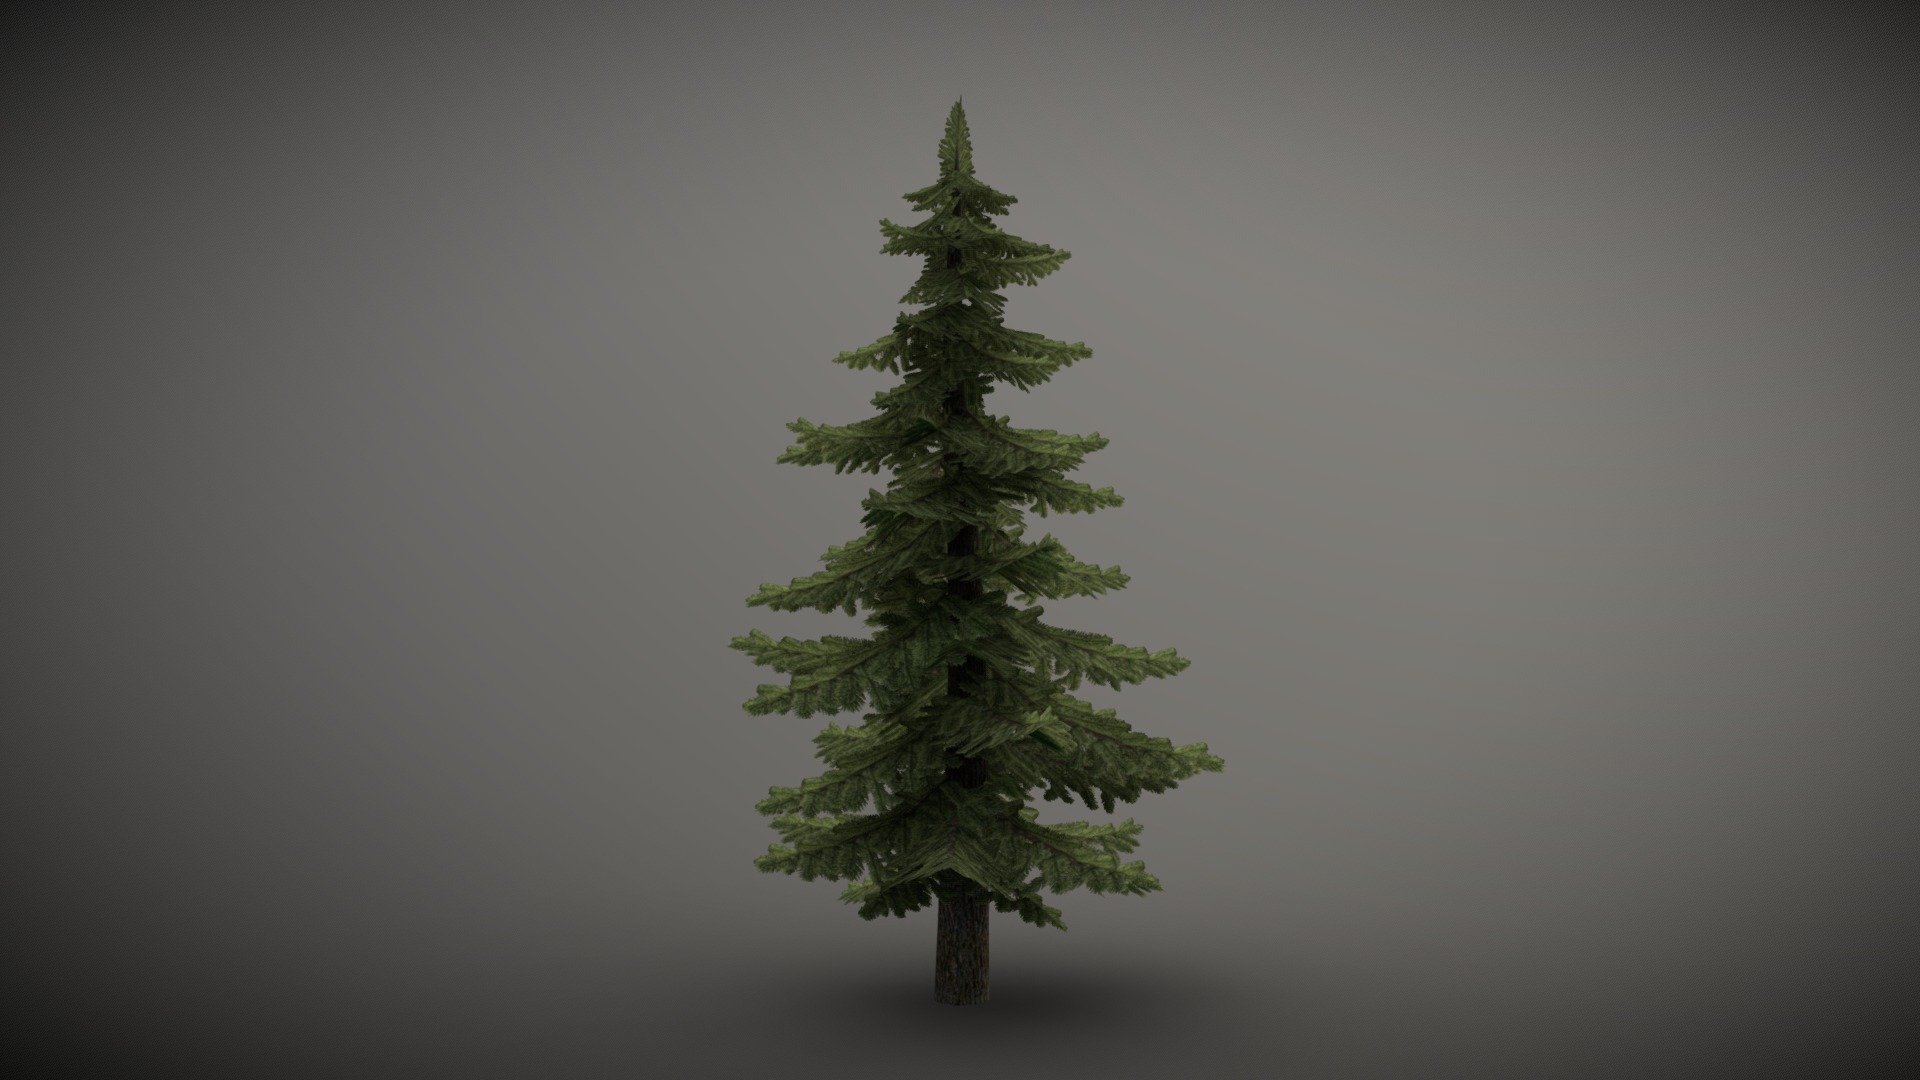 Spruce Tree


3D model of spruce, category Mid Poly. This model is perfectly suitable for use in computer games designed for medium-power personal computers. Contains 6 levels of detail (LOD):



LOD_0:




Vertices: 1517

Faces: 1560

LOD_1:




Vertices: 841

Faces: 840

LOD_2:




Vertices: 641

Faces: 312

LOD_3:




Vertices: 439

Faces: 170

LOD_4:




Vertices: 311

Faces: 106

LOD_5 (Billboard):

The billboard texture contains 8 renderings of spruce made from different angles.




Vertices: 4

Faces: 1
 - Spruce Tree | Mid Poly | With LODs - 3D model by S Λ N D R I K (@S7NDRIK) 3d model